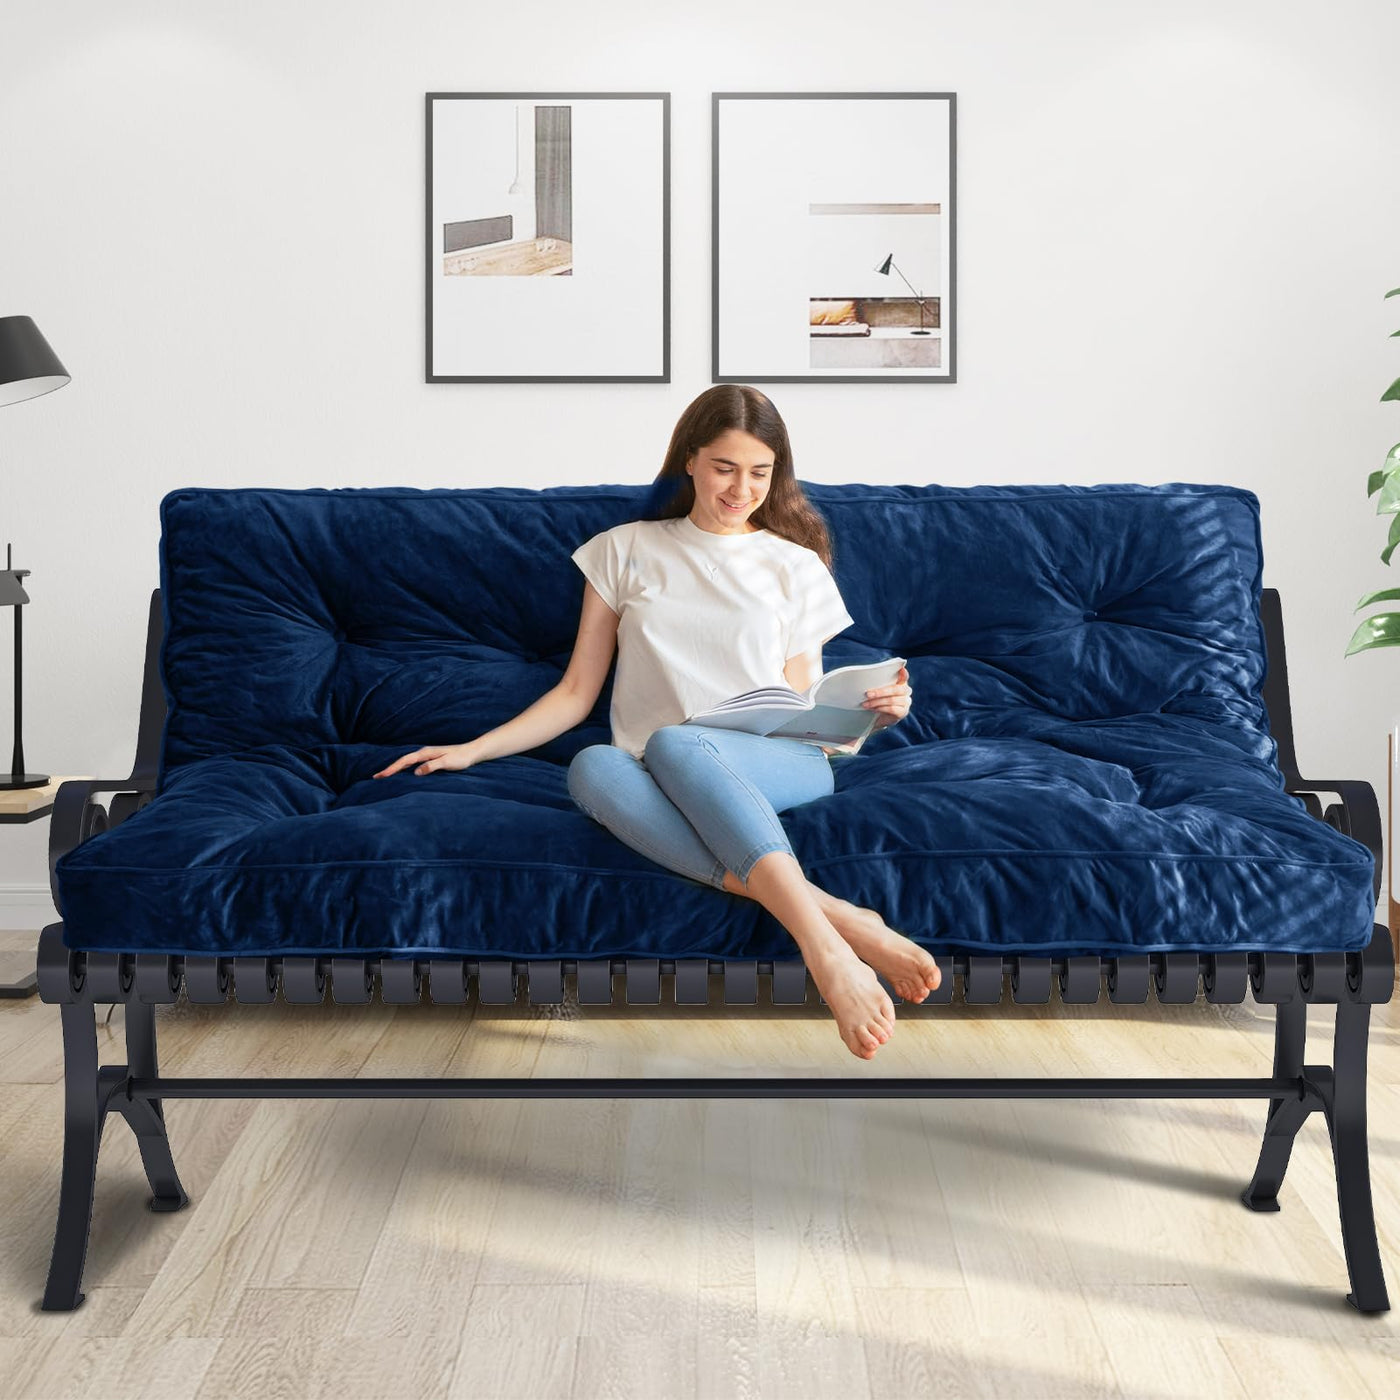 MAXYOYO 6" Thick Futons Sofa Couch Bed, Velvet Twin Size Futon Mattress for Adults (Mattress Only), Navy